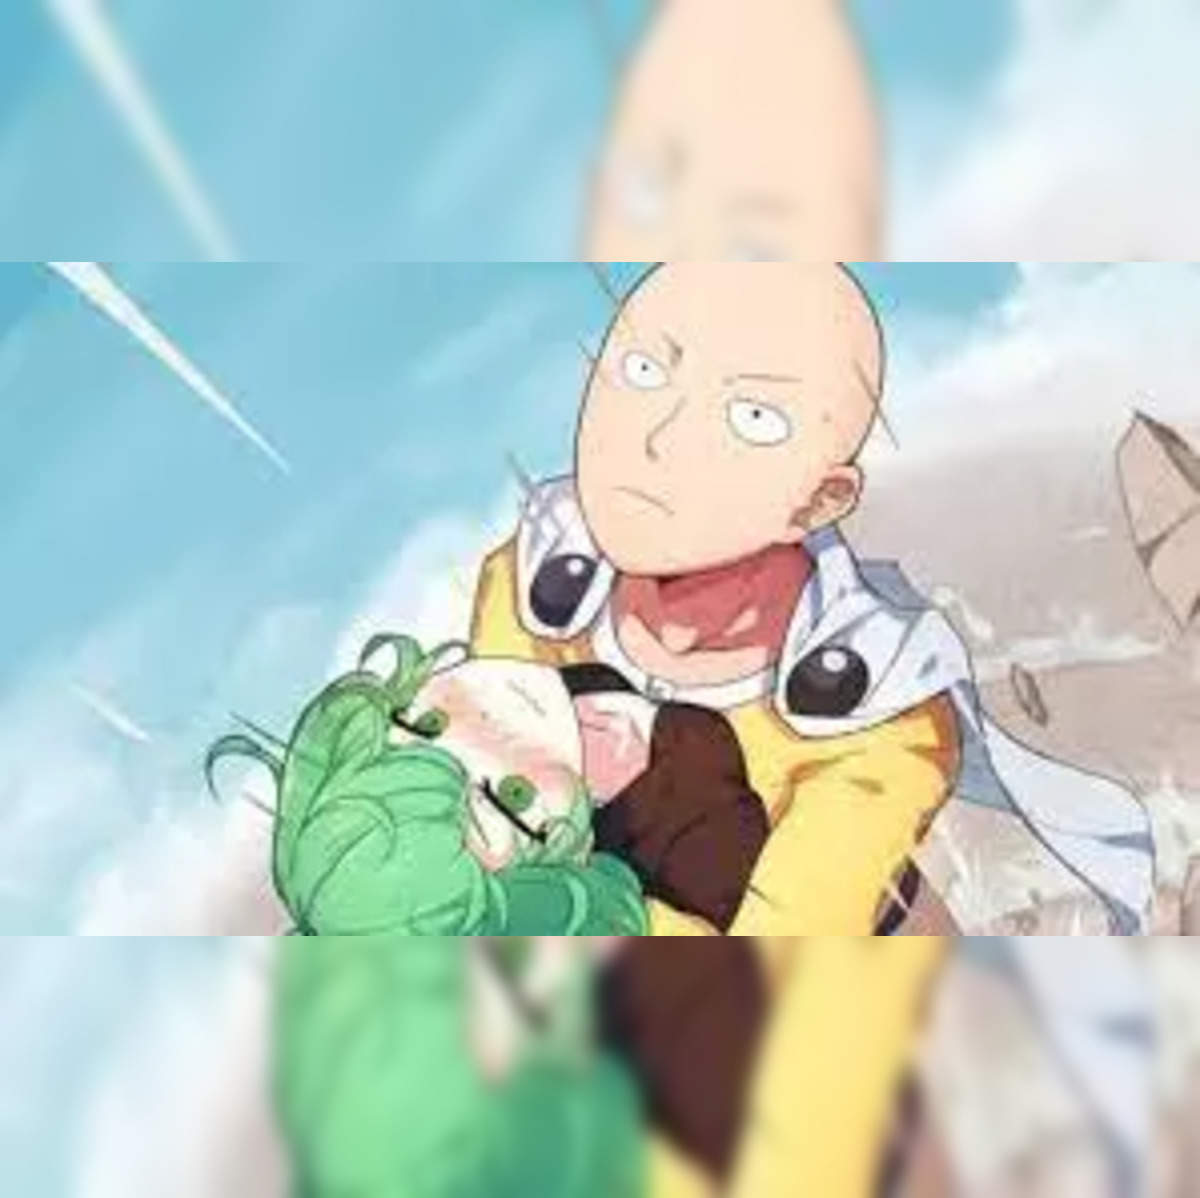 When is One Punch Man Season 3 coming out? Latest May 2023 Update - Spiel  Anime